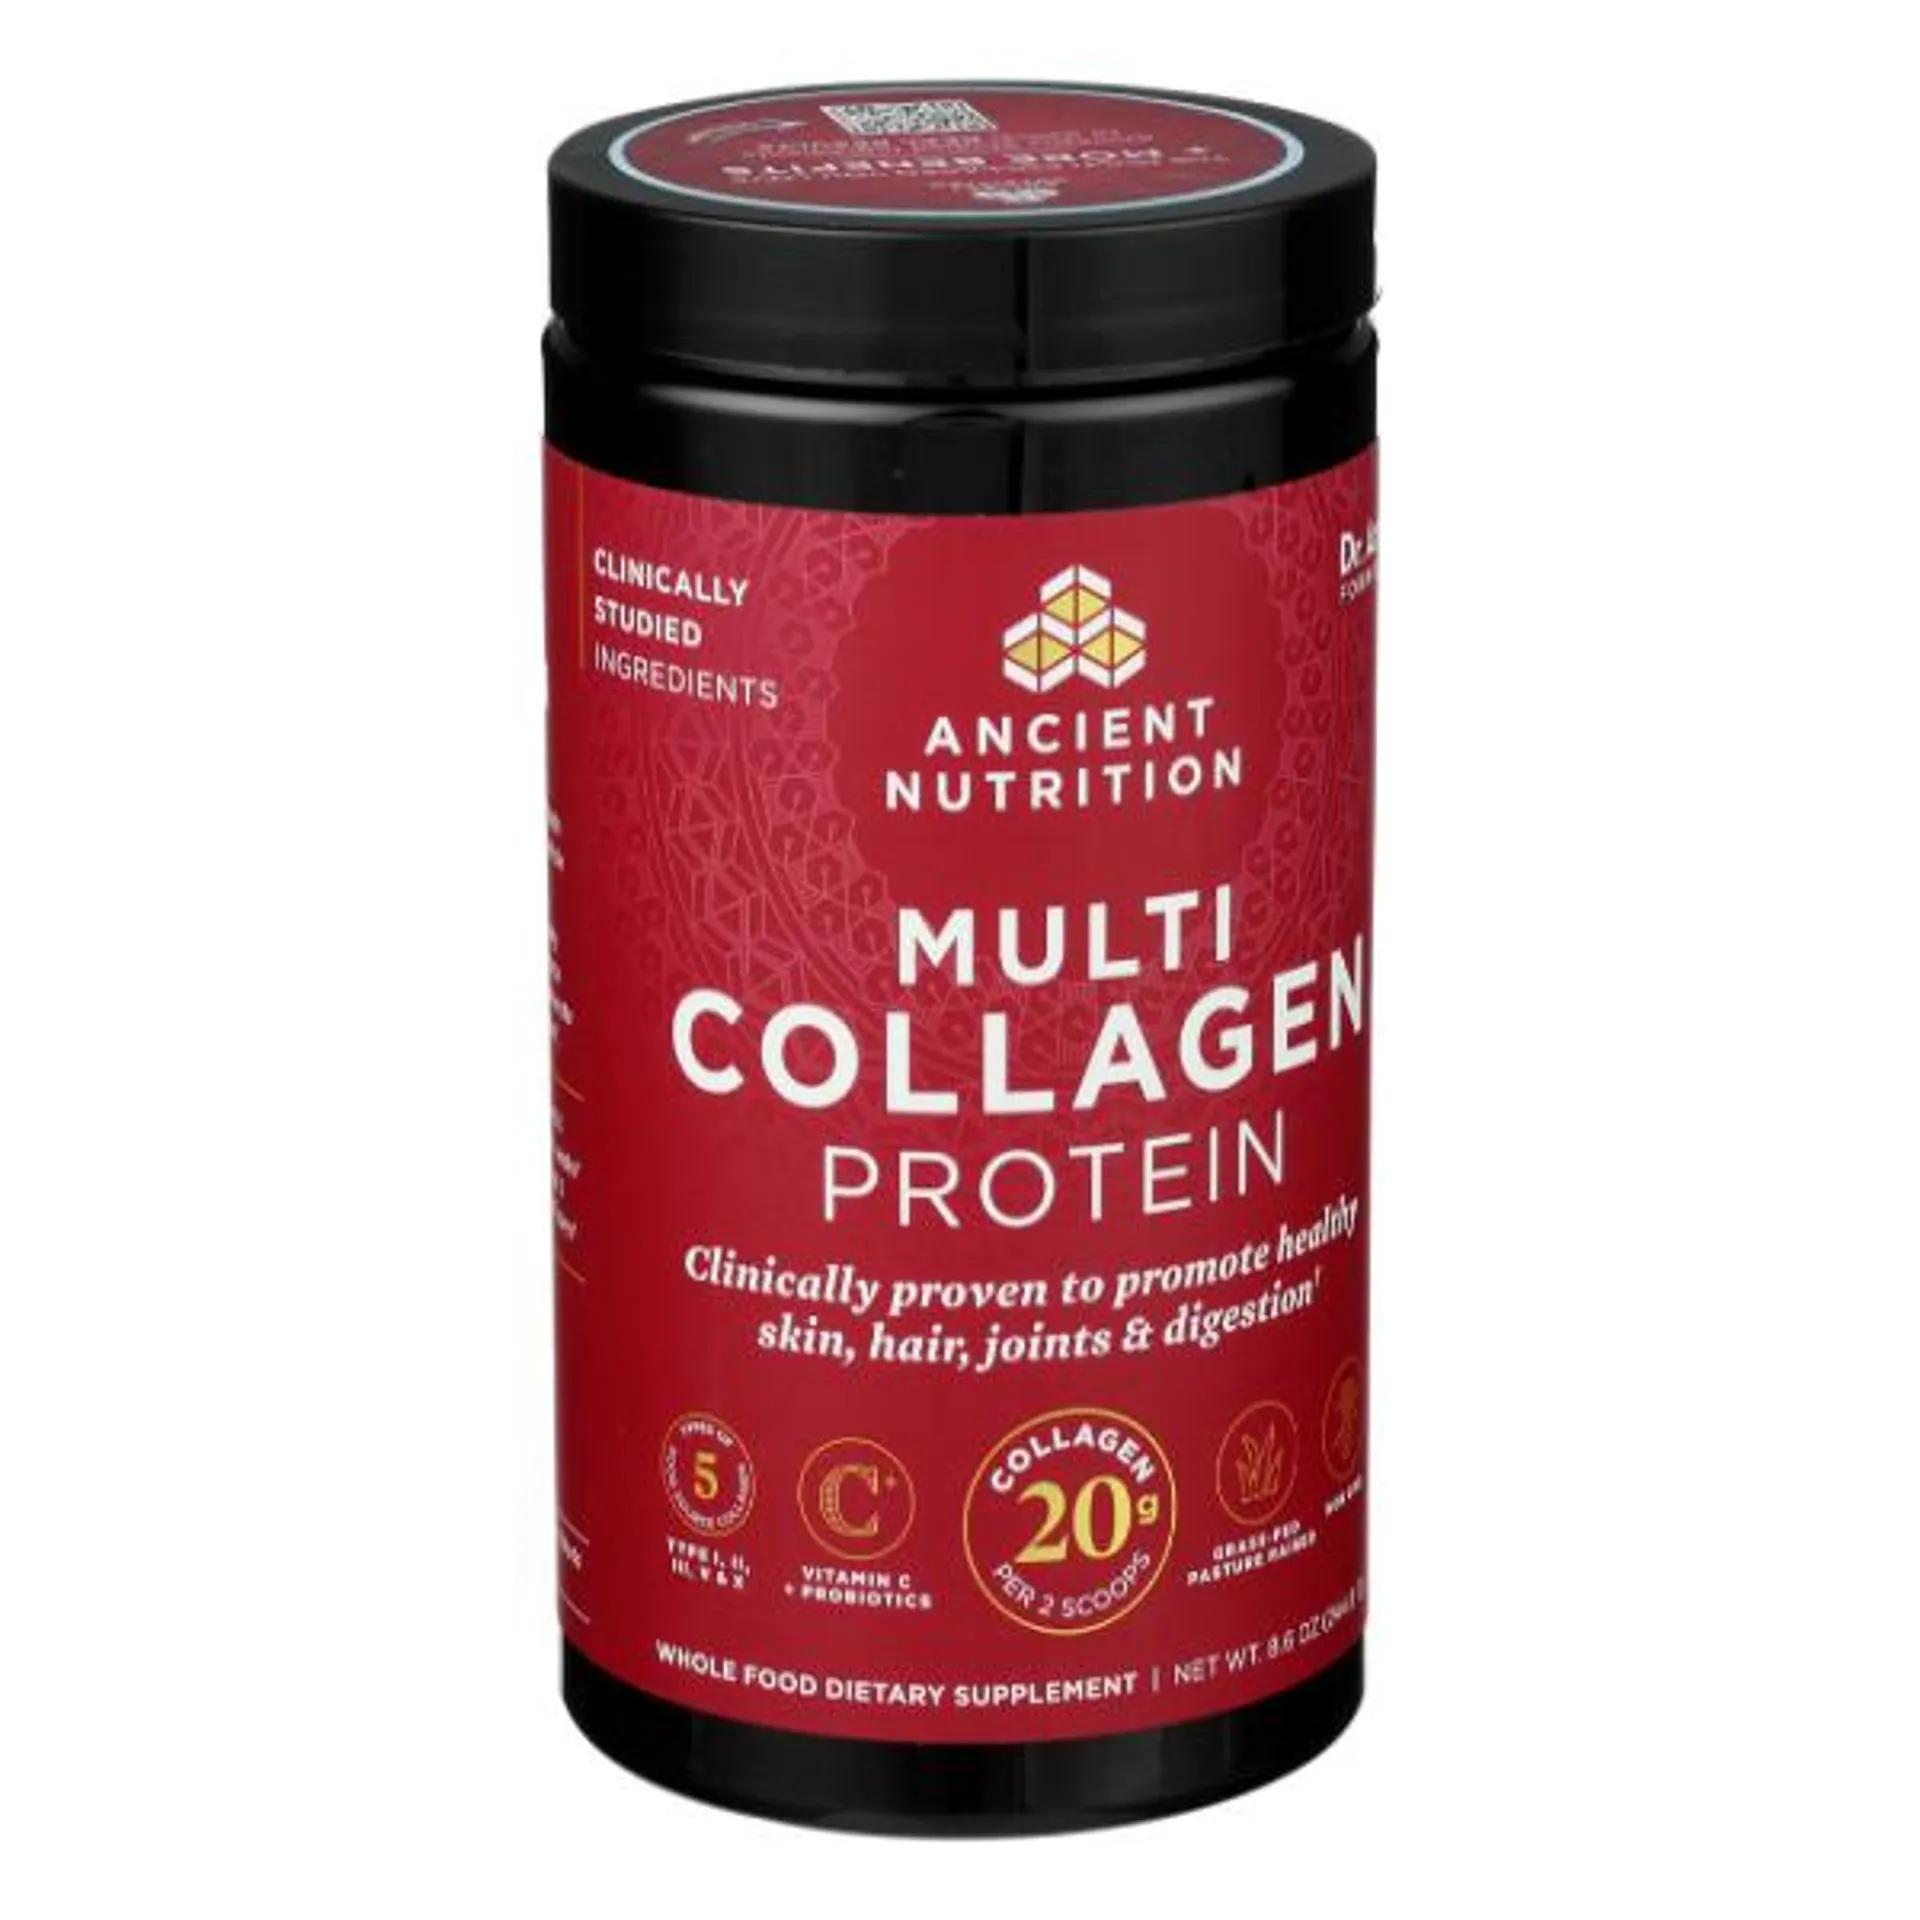 Ancient Nutrition Multi Collagen Protein - 8.6 Ounce